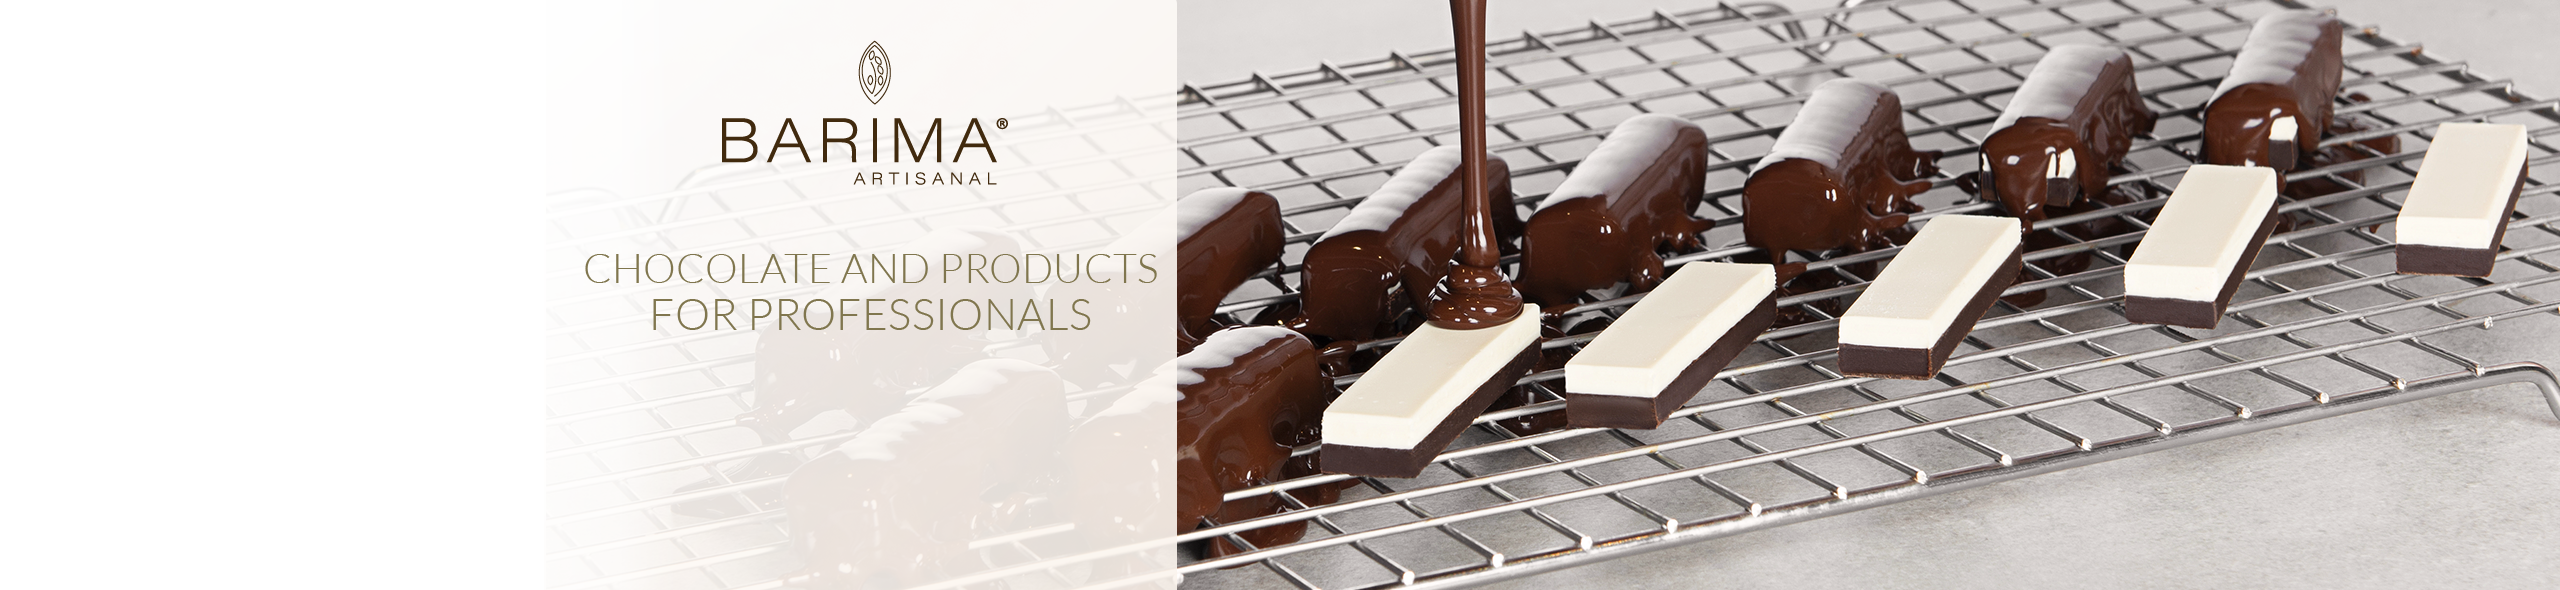 Chocolate and products for professionals